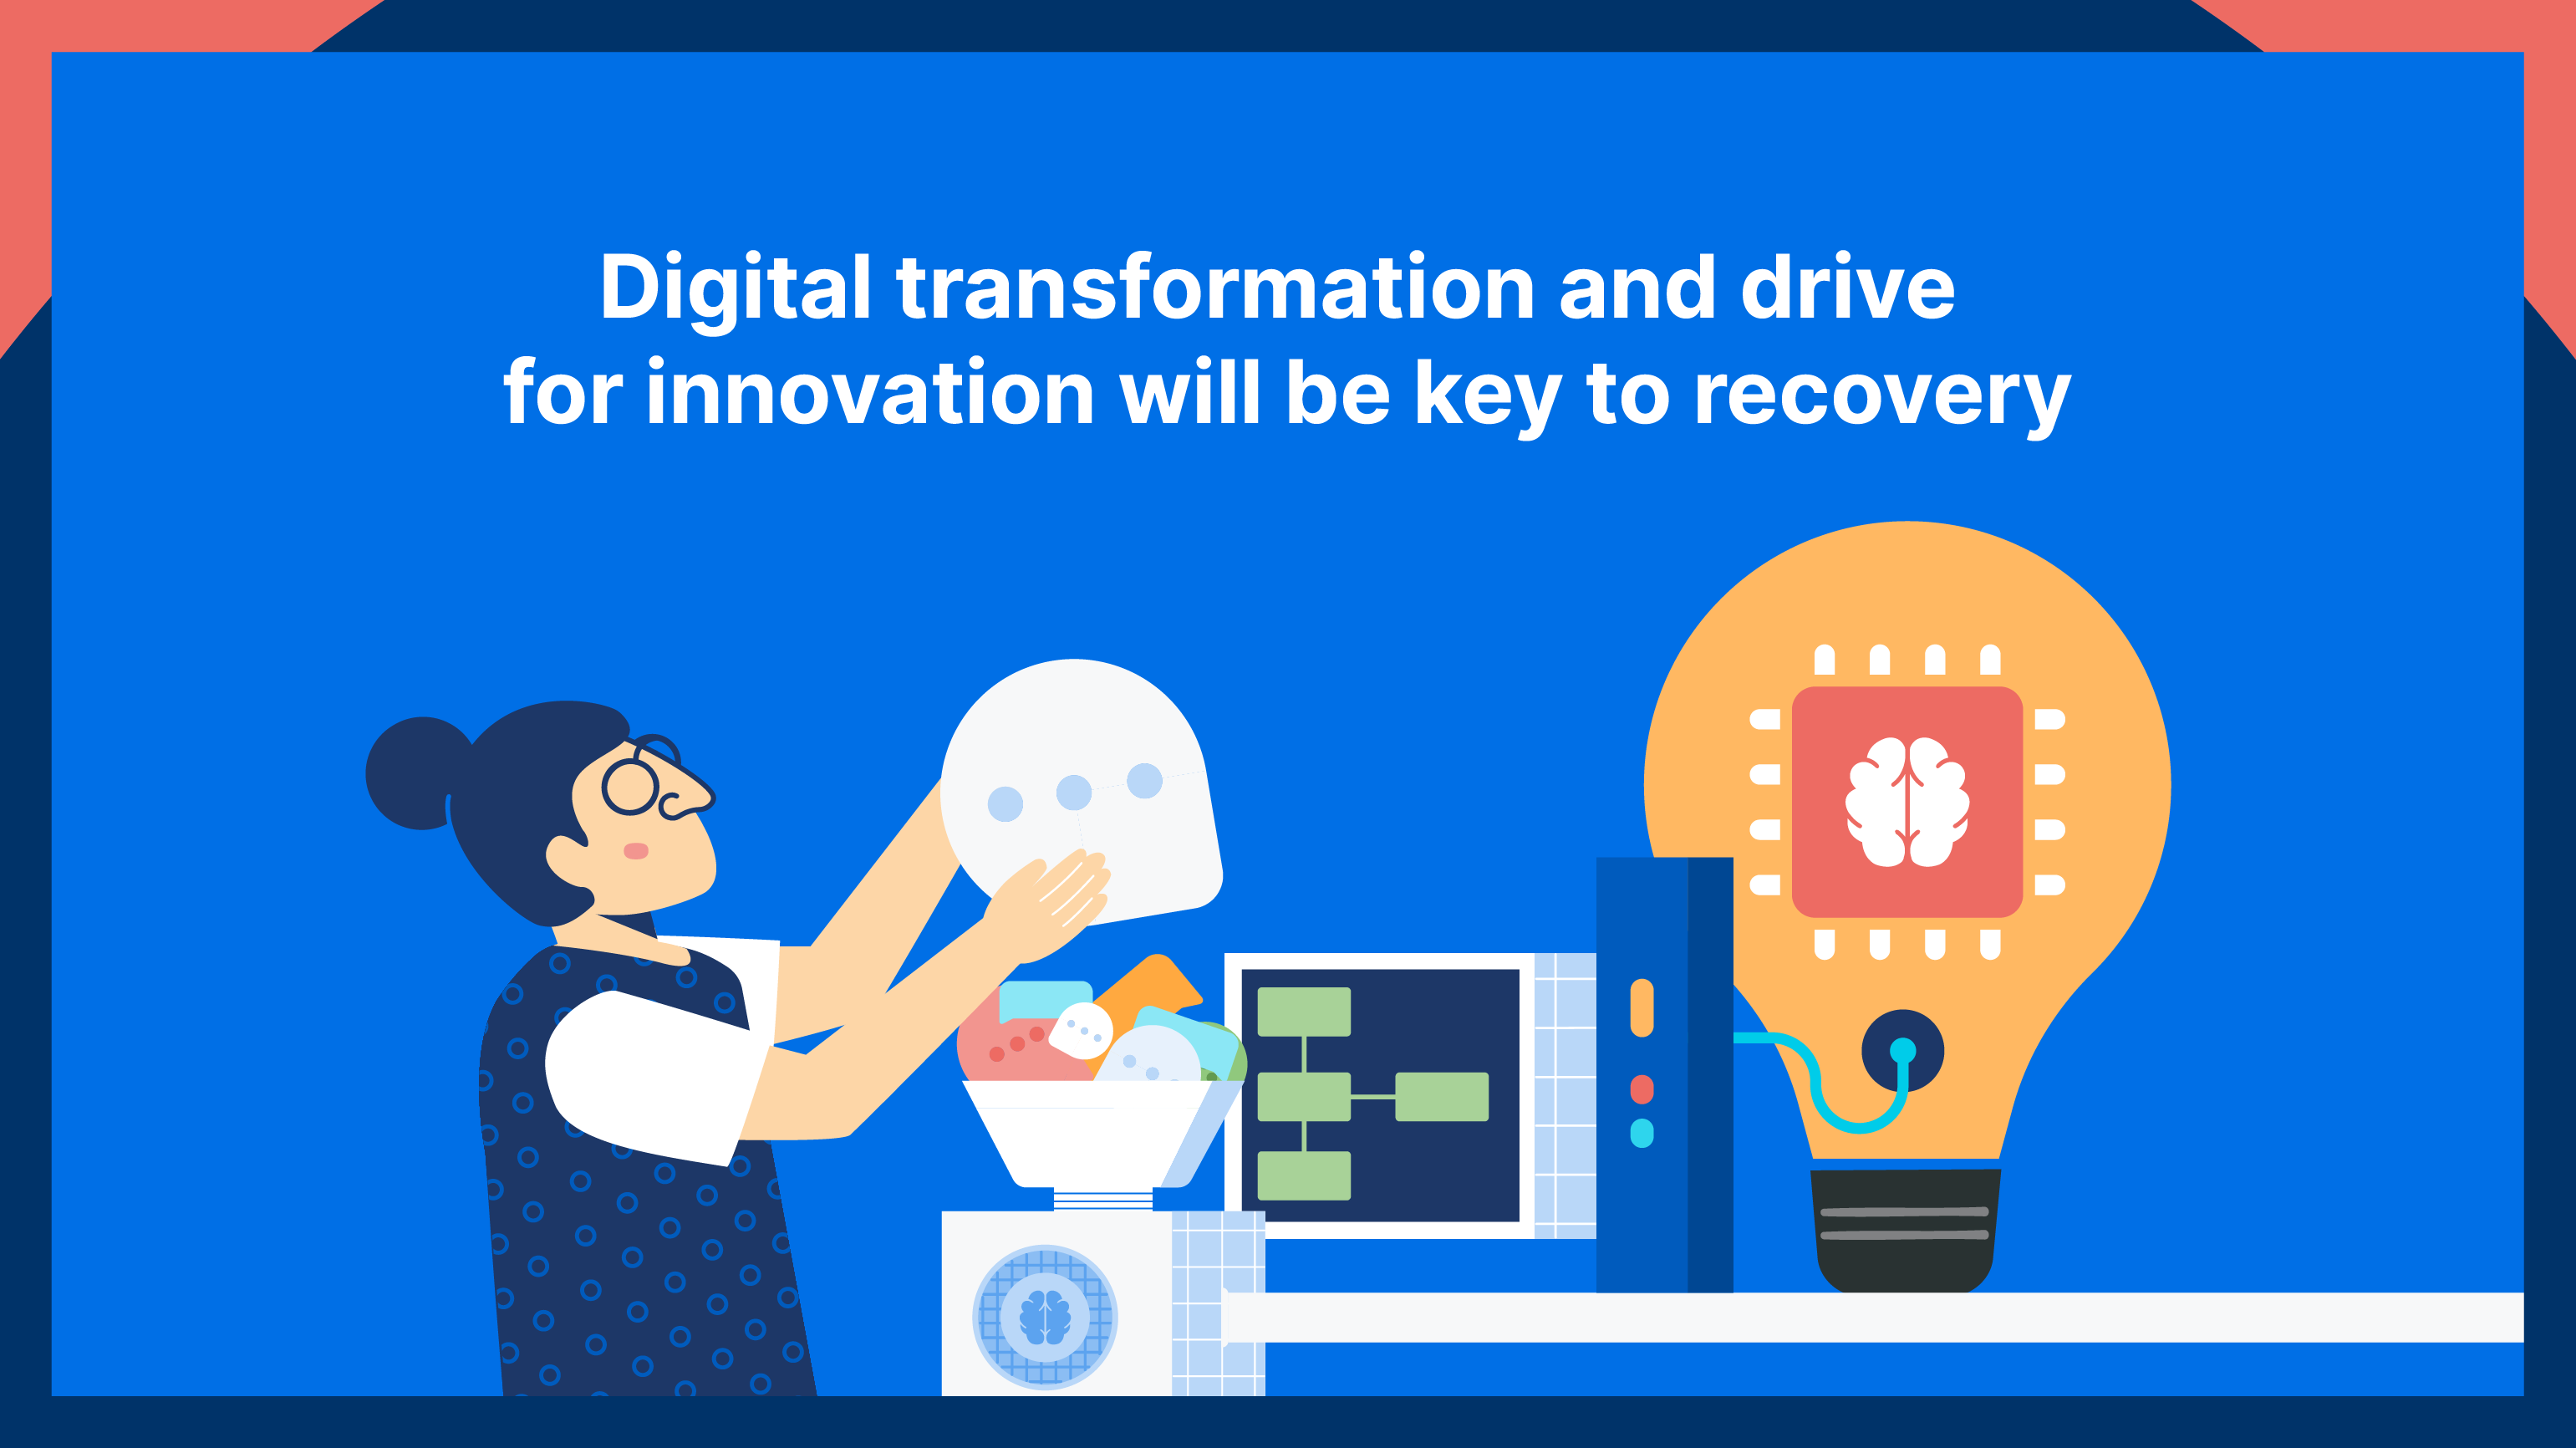 Overall, digital transformation and drive for innovation is still expected to be the key to recovery in 2021.